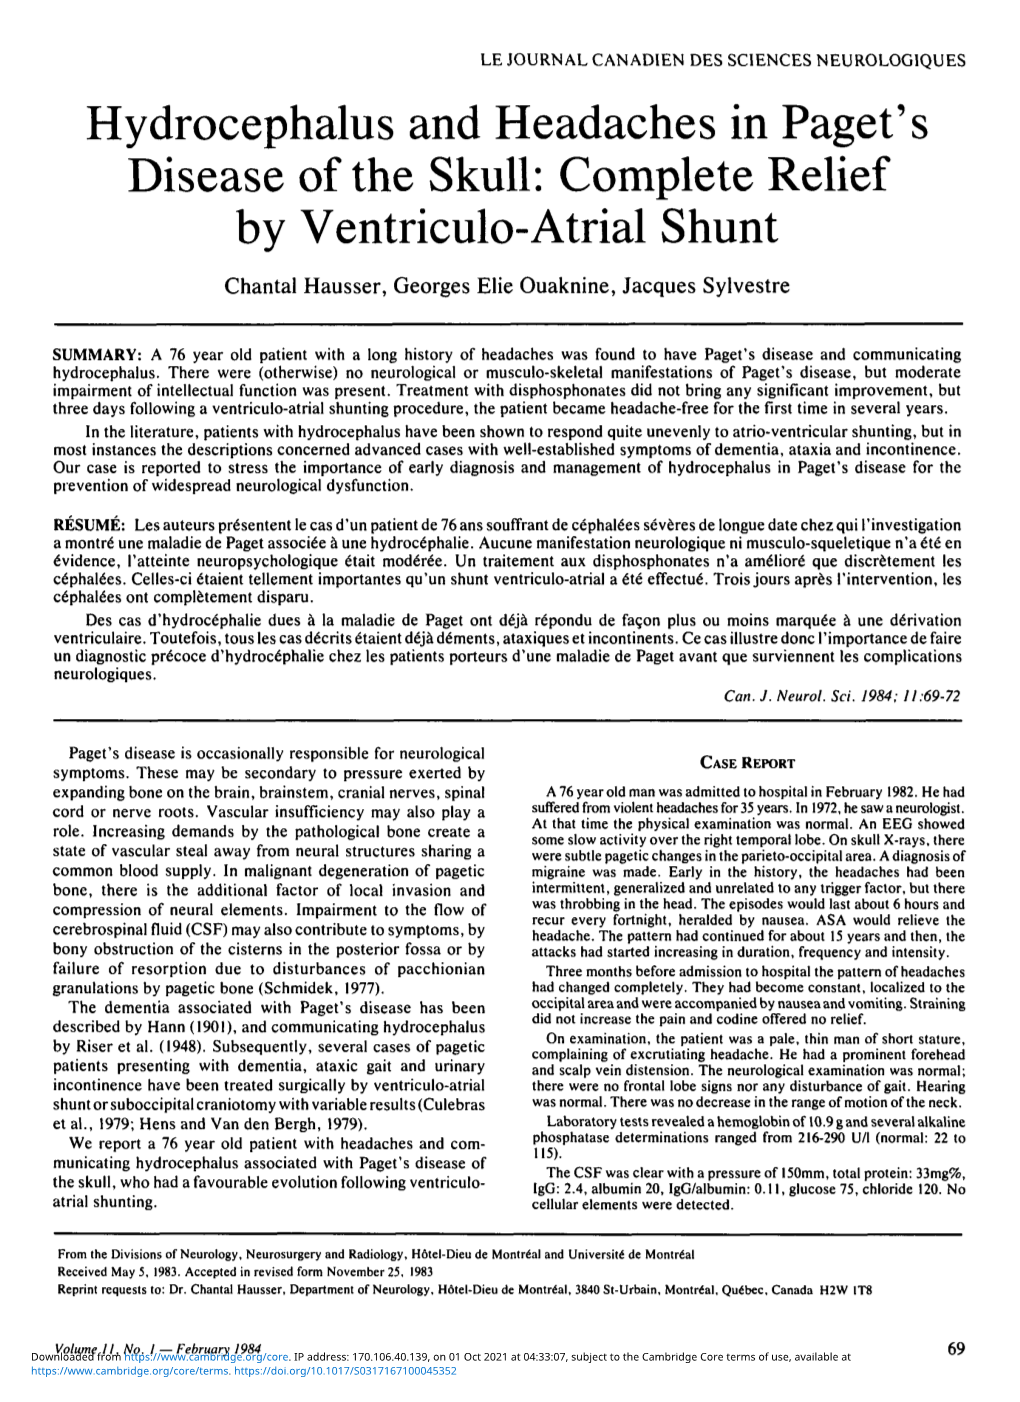 Hydrocephalus And Headaches In Pagets Disease Of The Skull Complete Relief By Ventriculo 6873